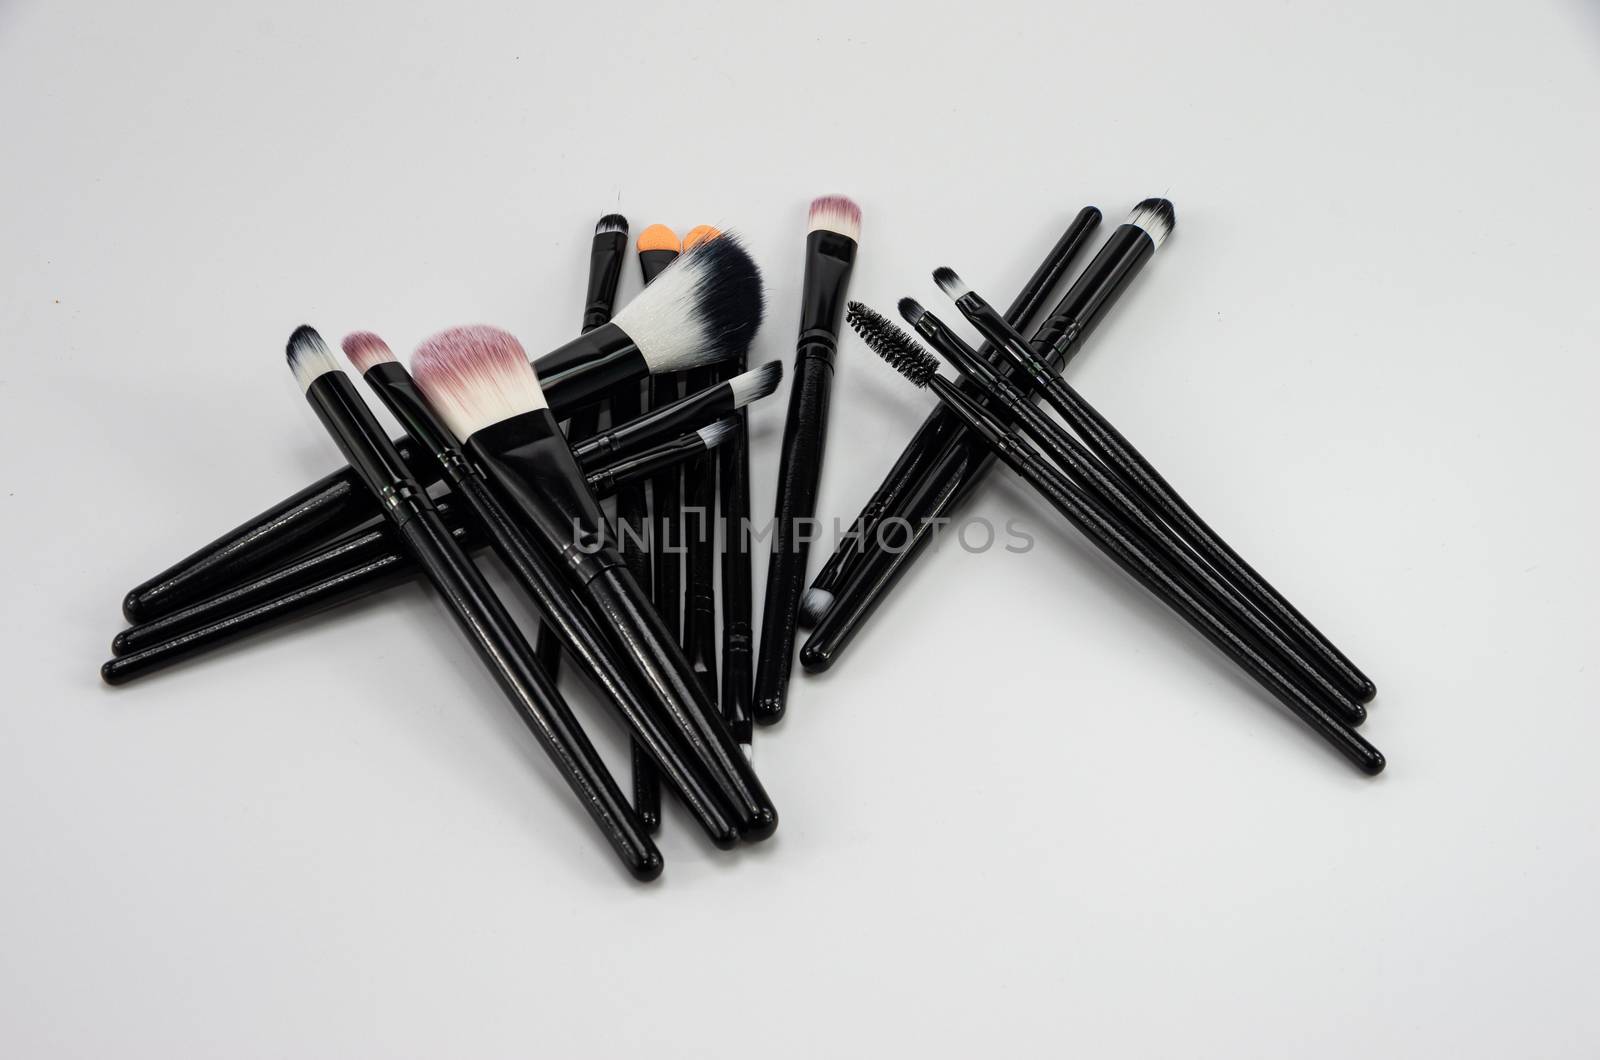 Various cosmetic brushes for make up eyebrows, eyes, face by Oskars